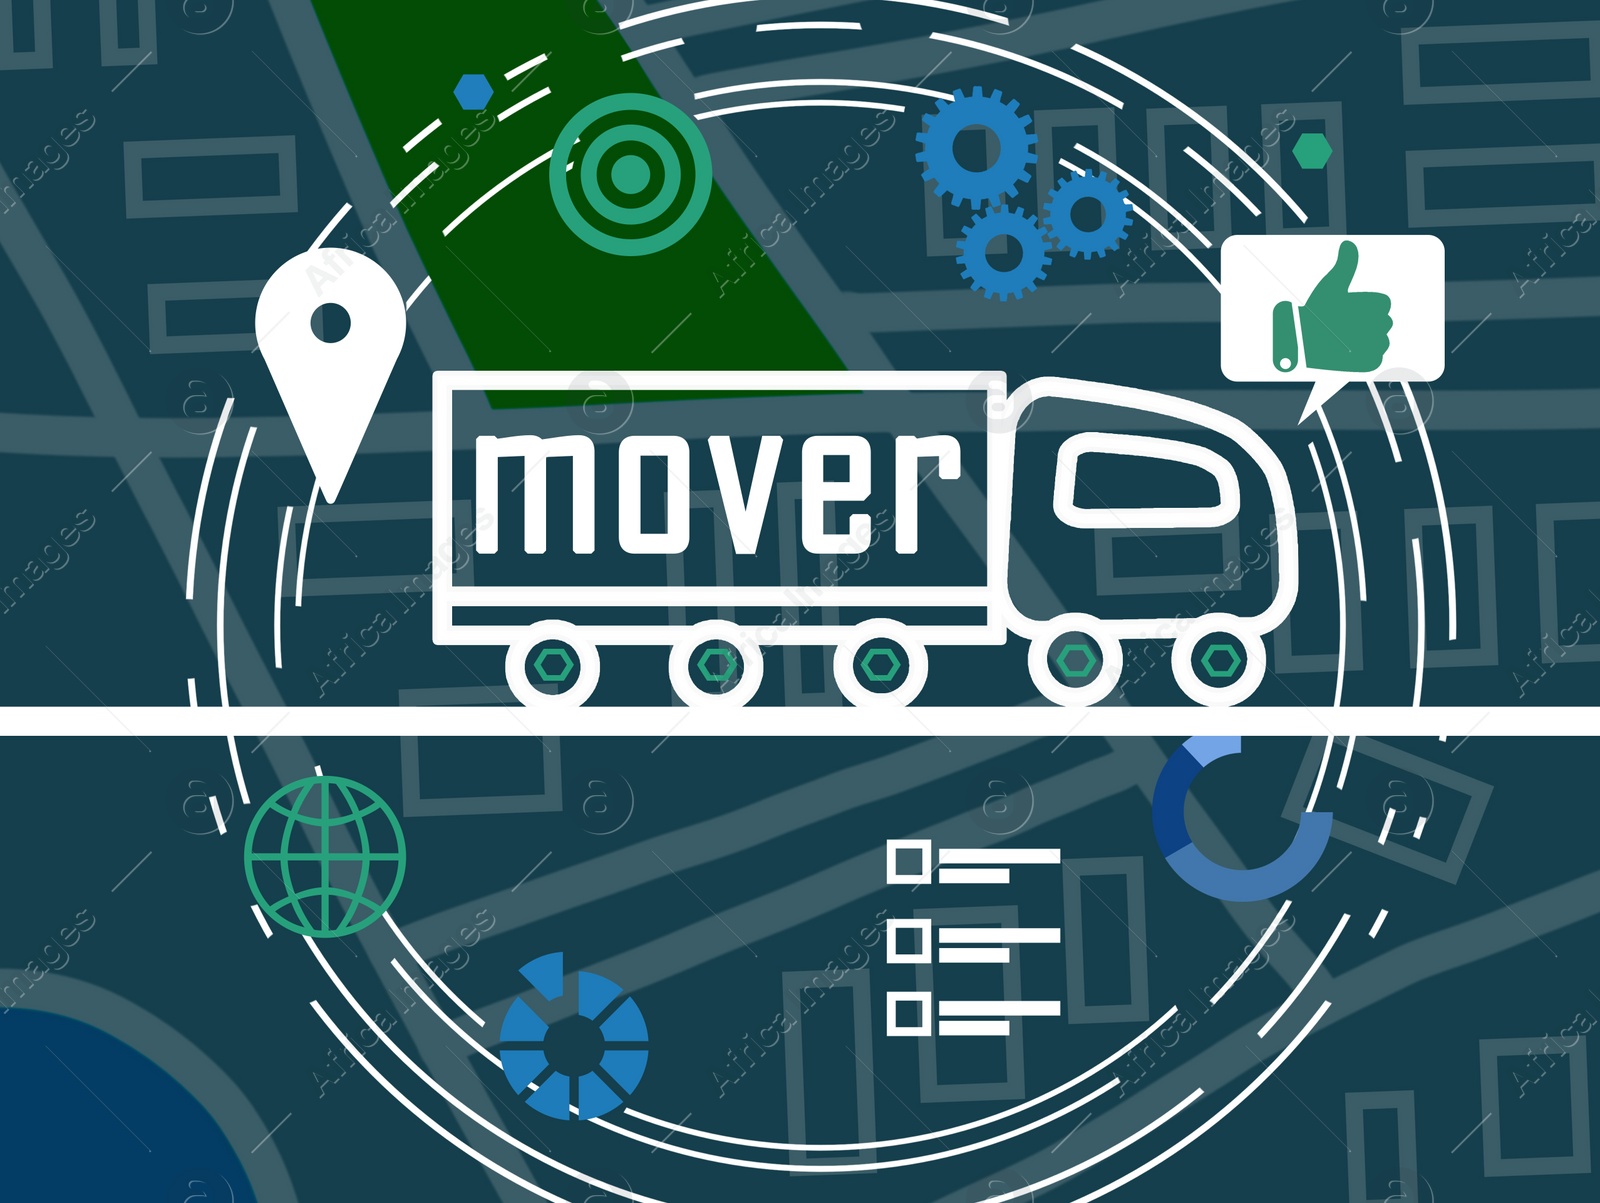 Image of Movers service. Illustration of truck, map and different icons